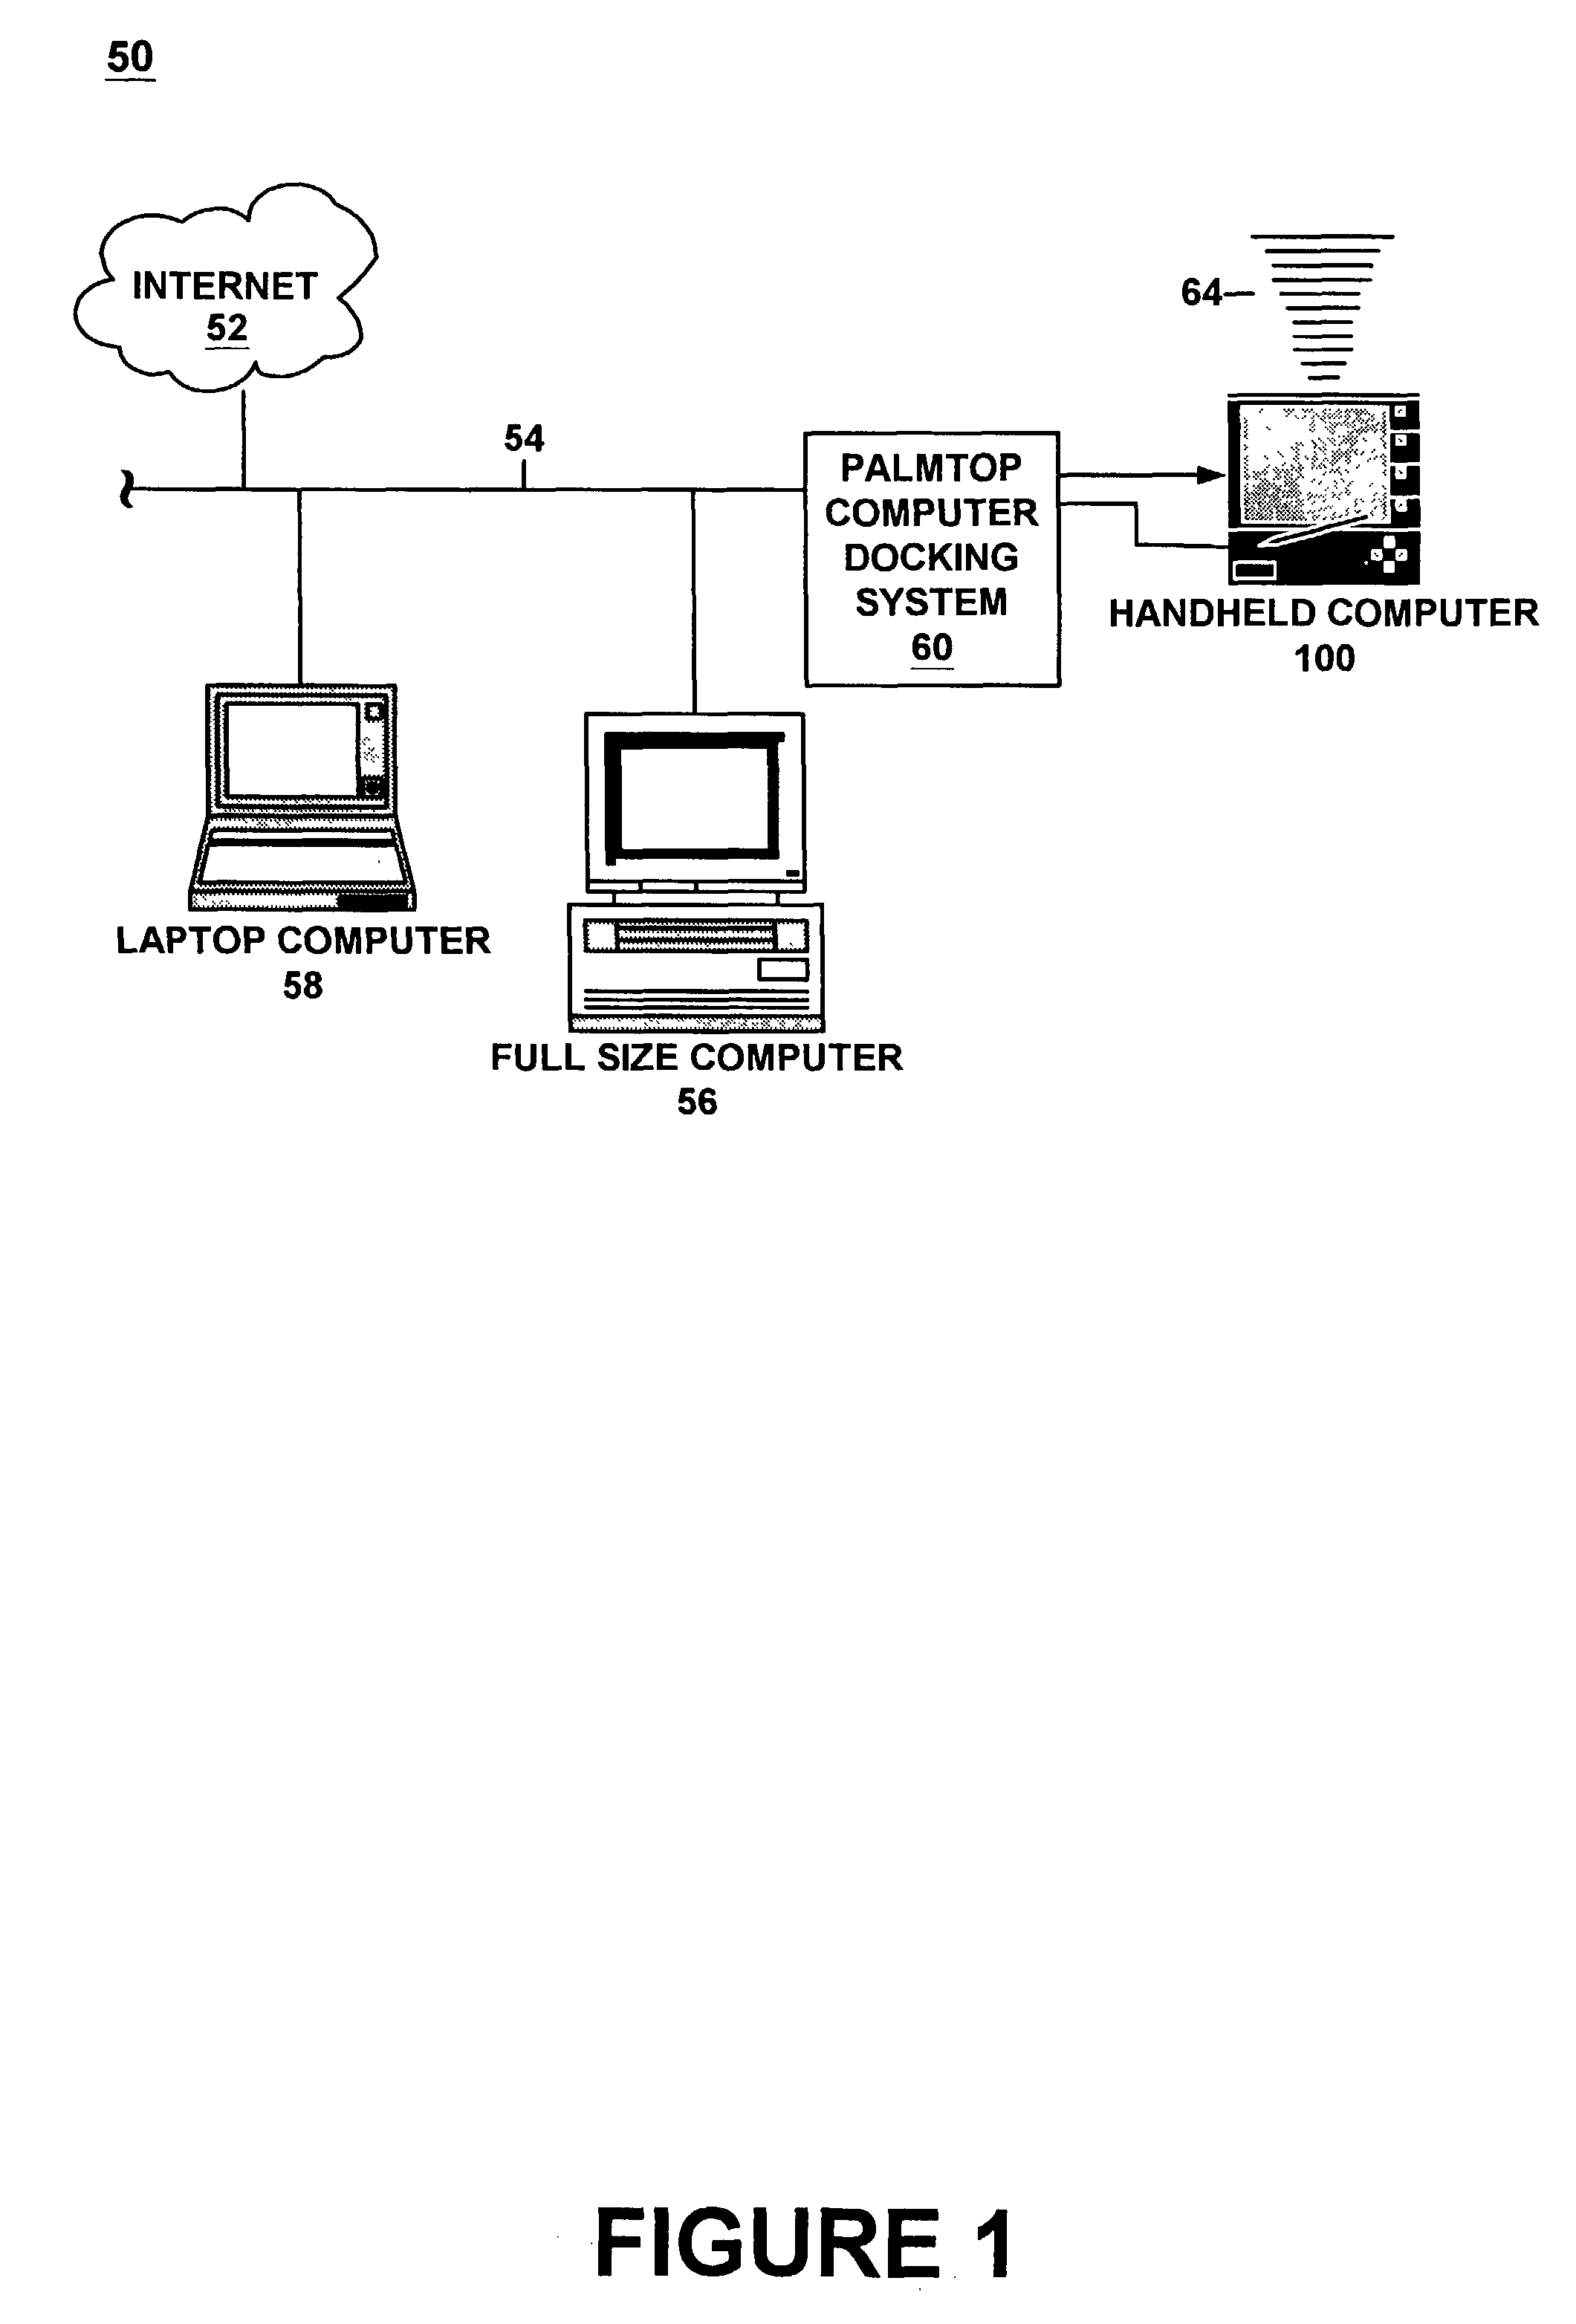 Palmtop computer docking system with USB cable assembly